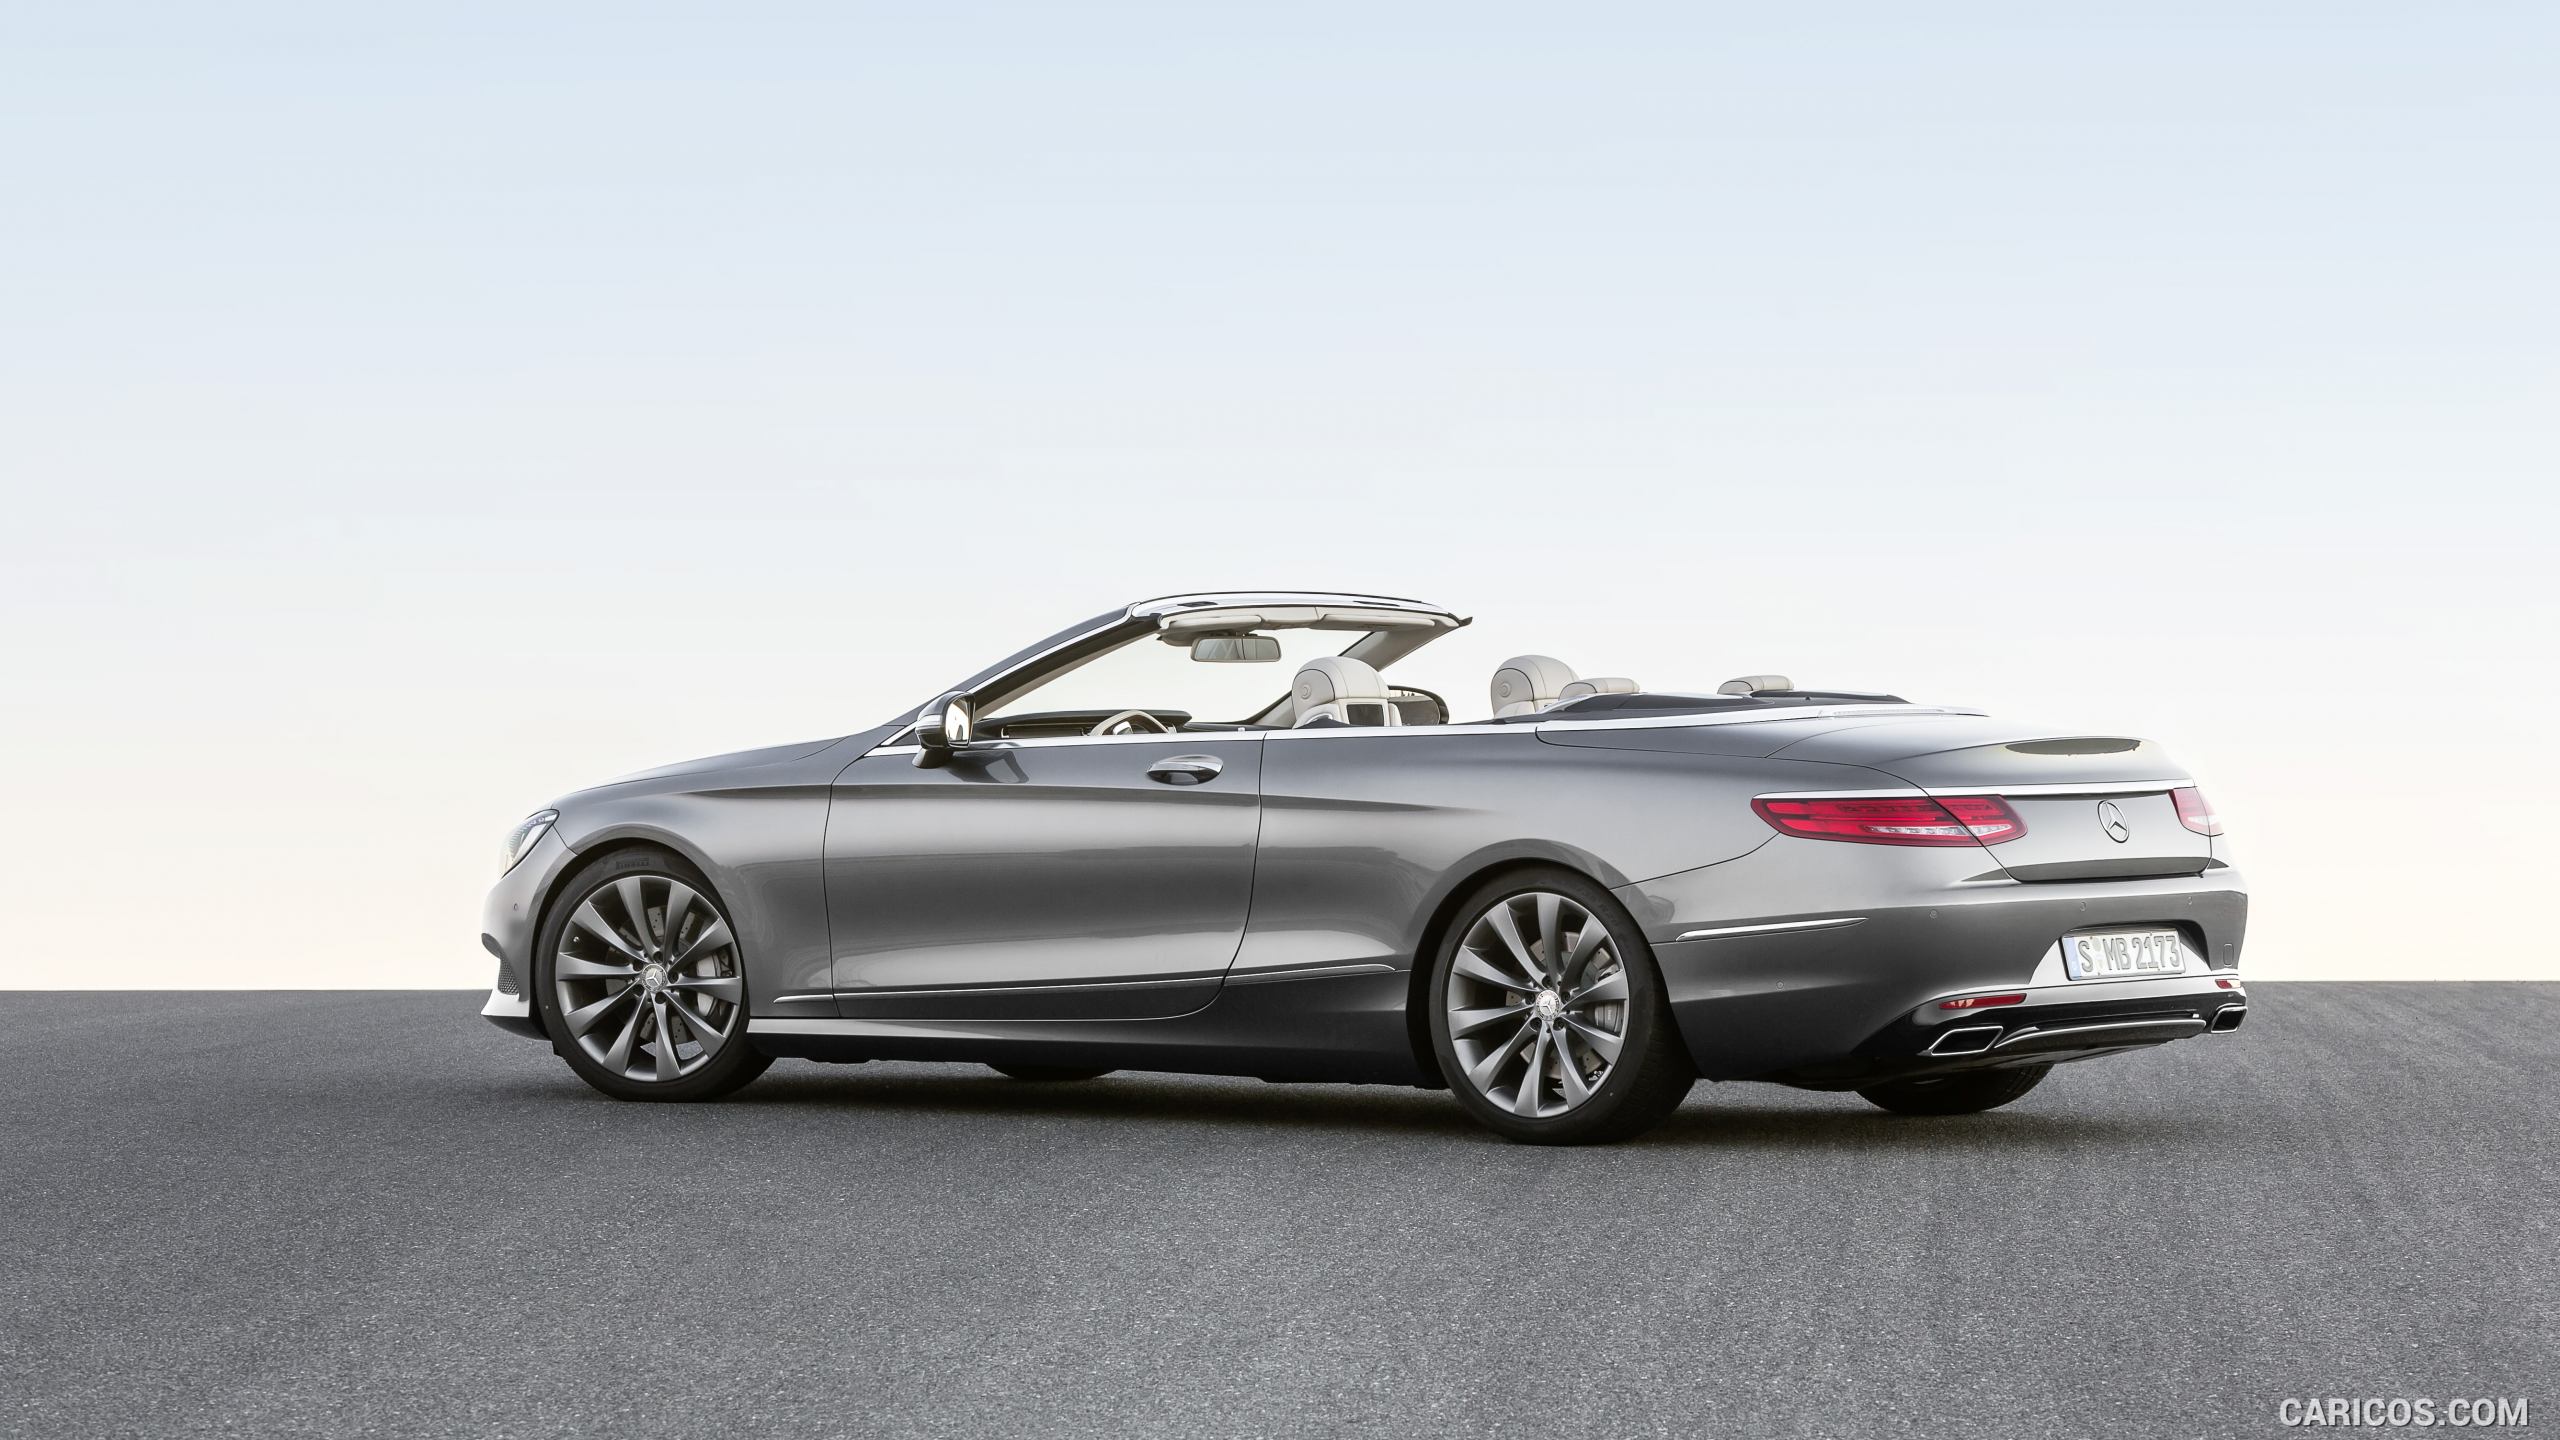 2017 Mercedes-Benz S-Class S500 Cabriolet (Selenit Grey) - Side, #13 of 56